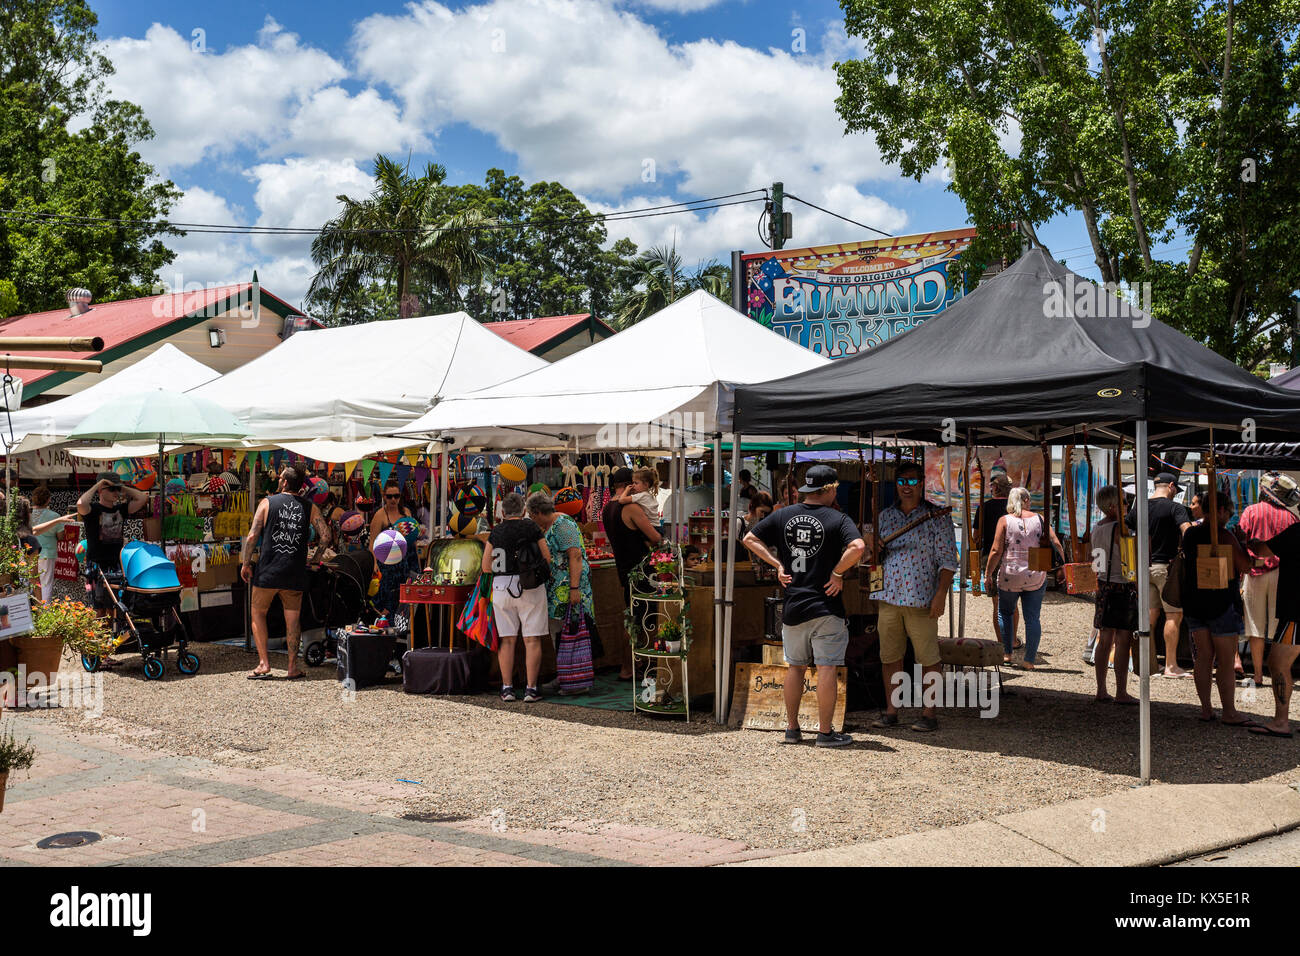 Since 1979, the Eumandi Markets are a source of energy, variety, fresheness and friendliness of the town of Eumundi in the Sunshine Coast of Australia Stock Photo